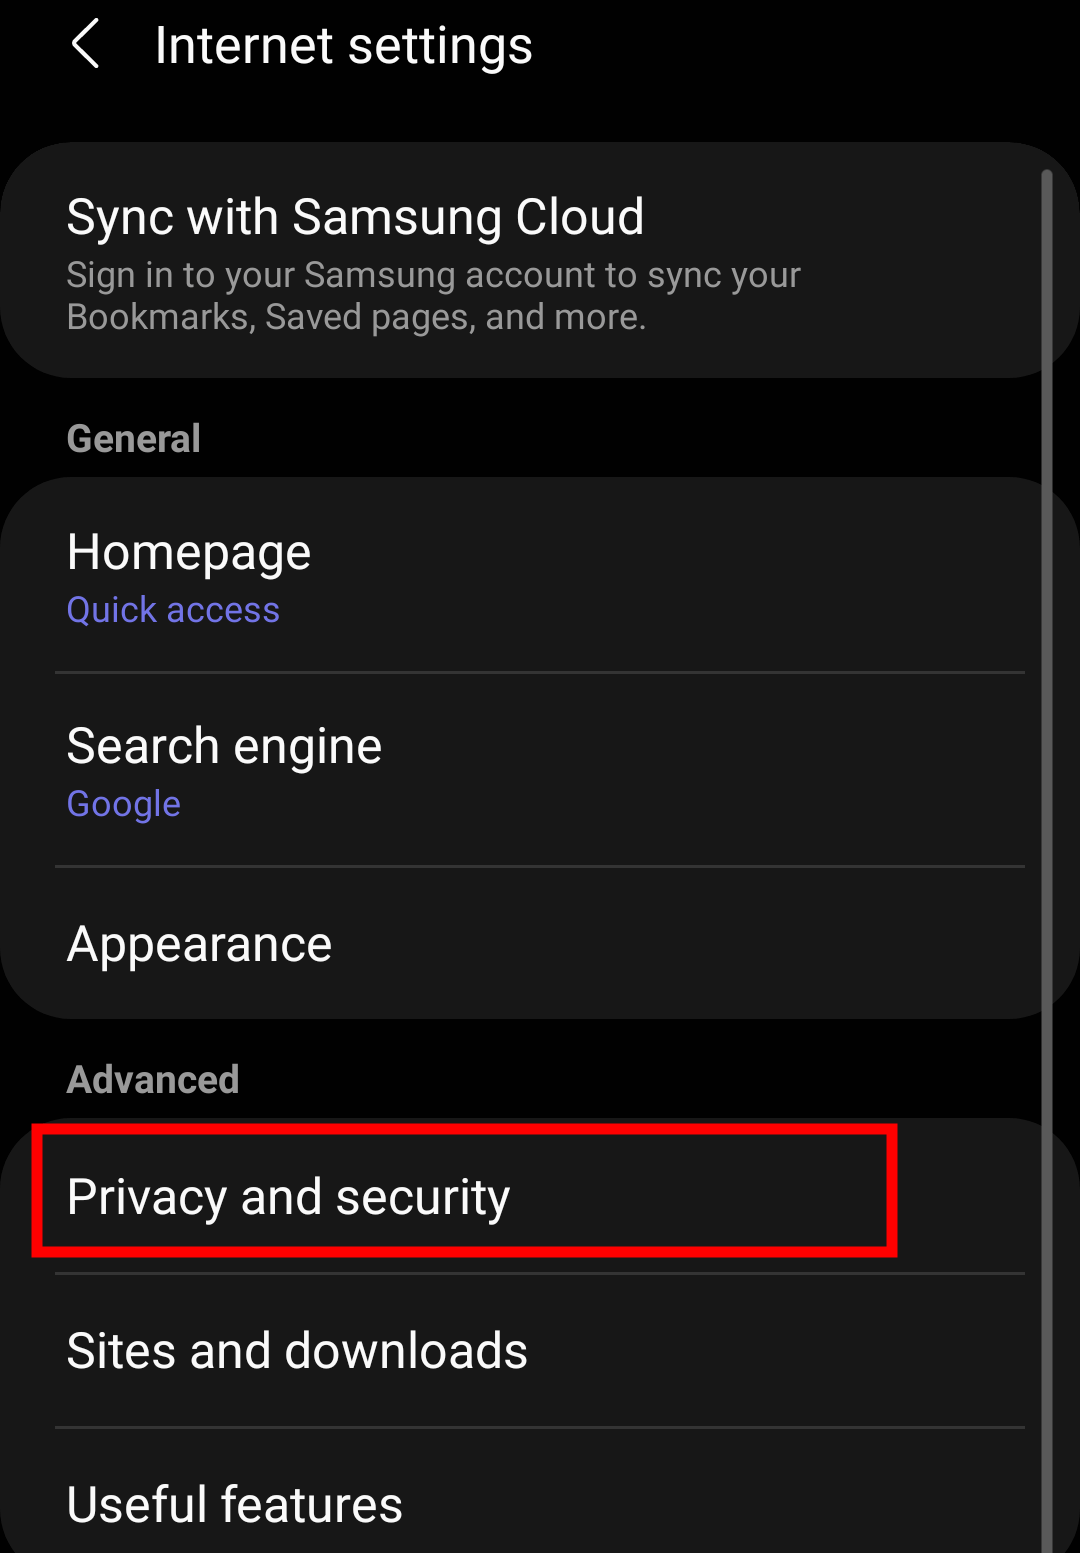 Privacy and Security menu tab in Samsung Internet